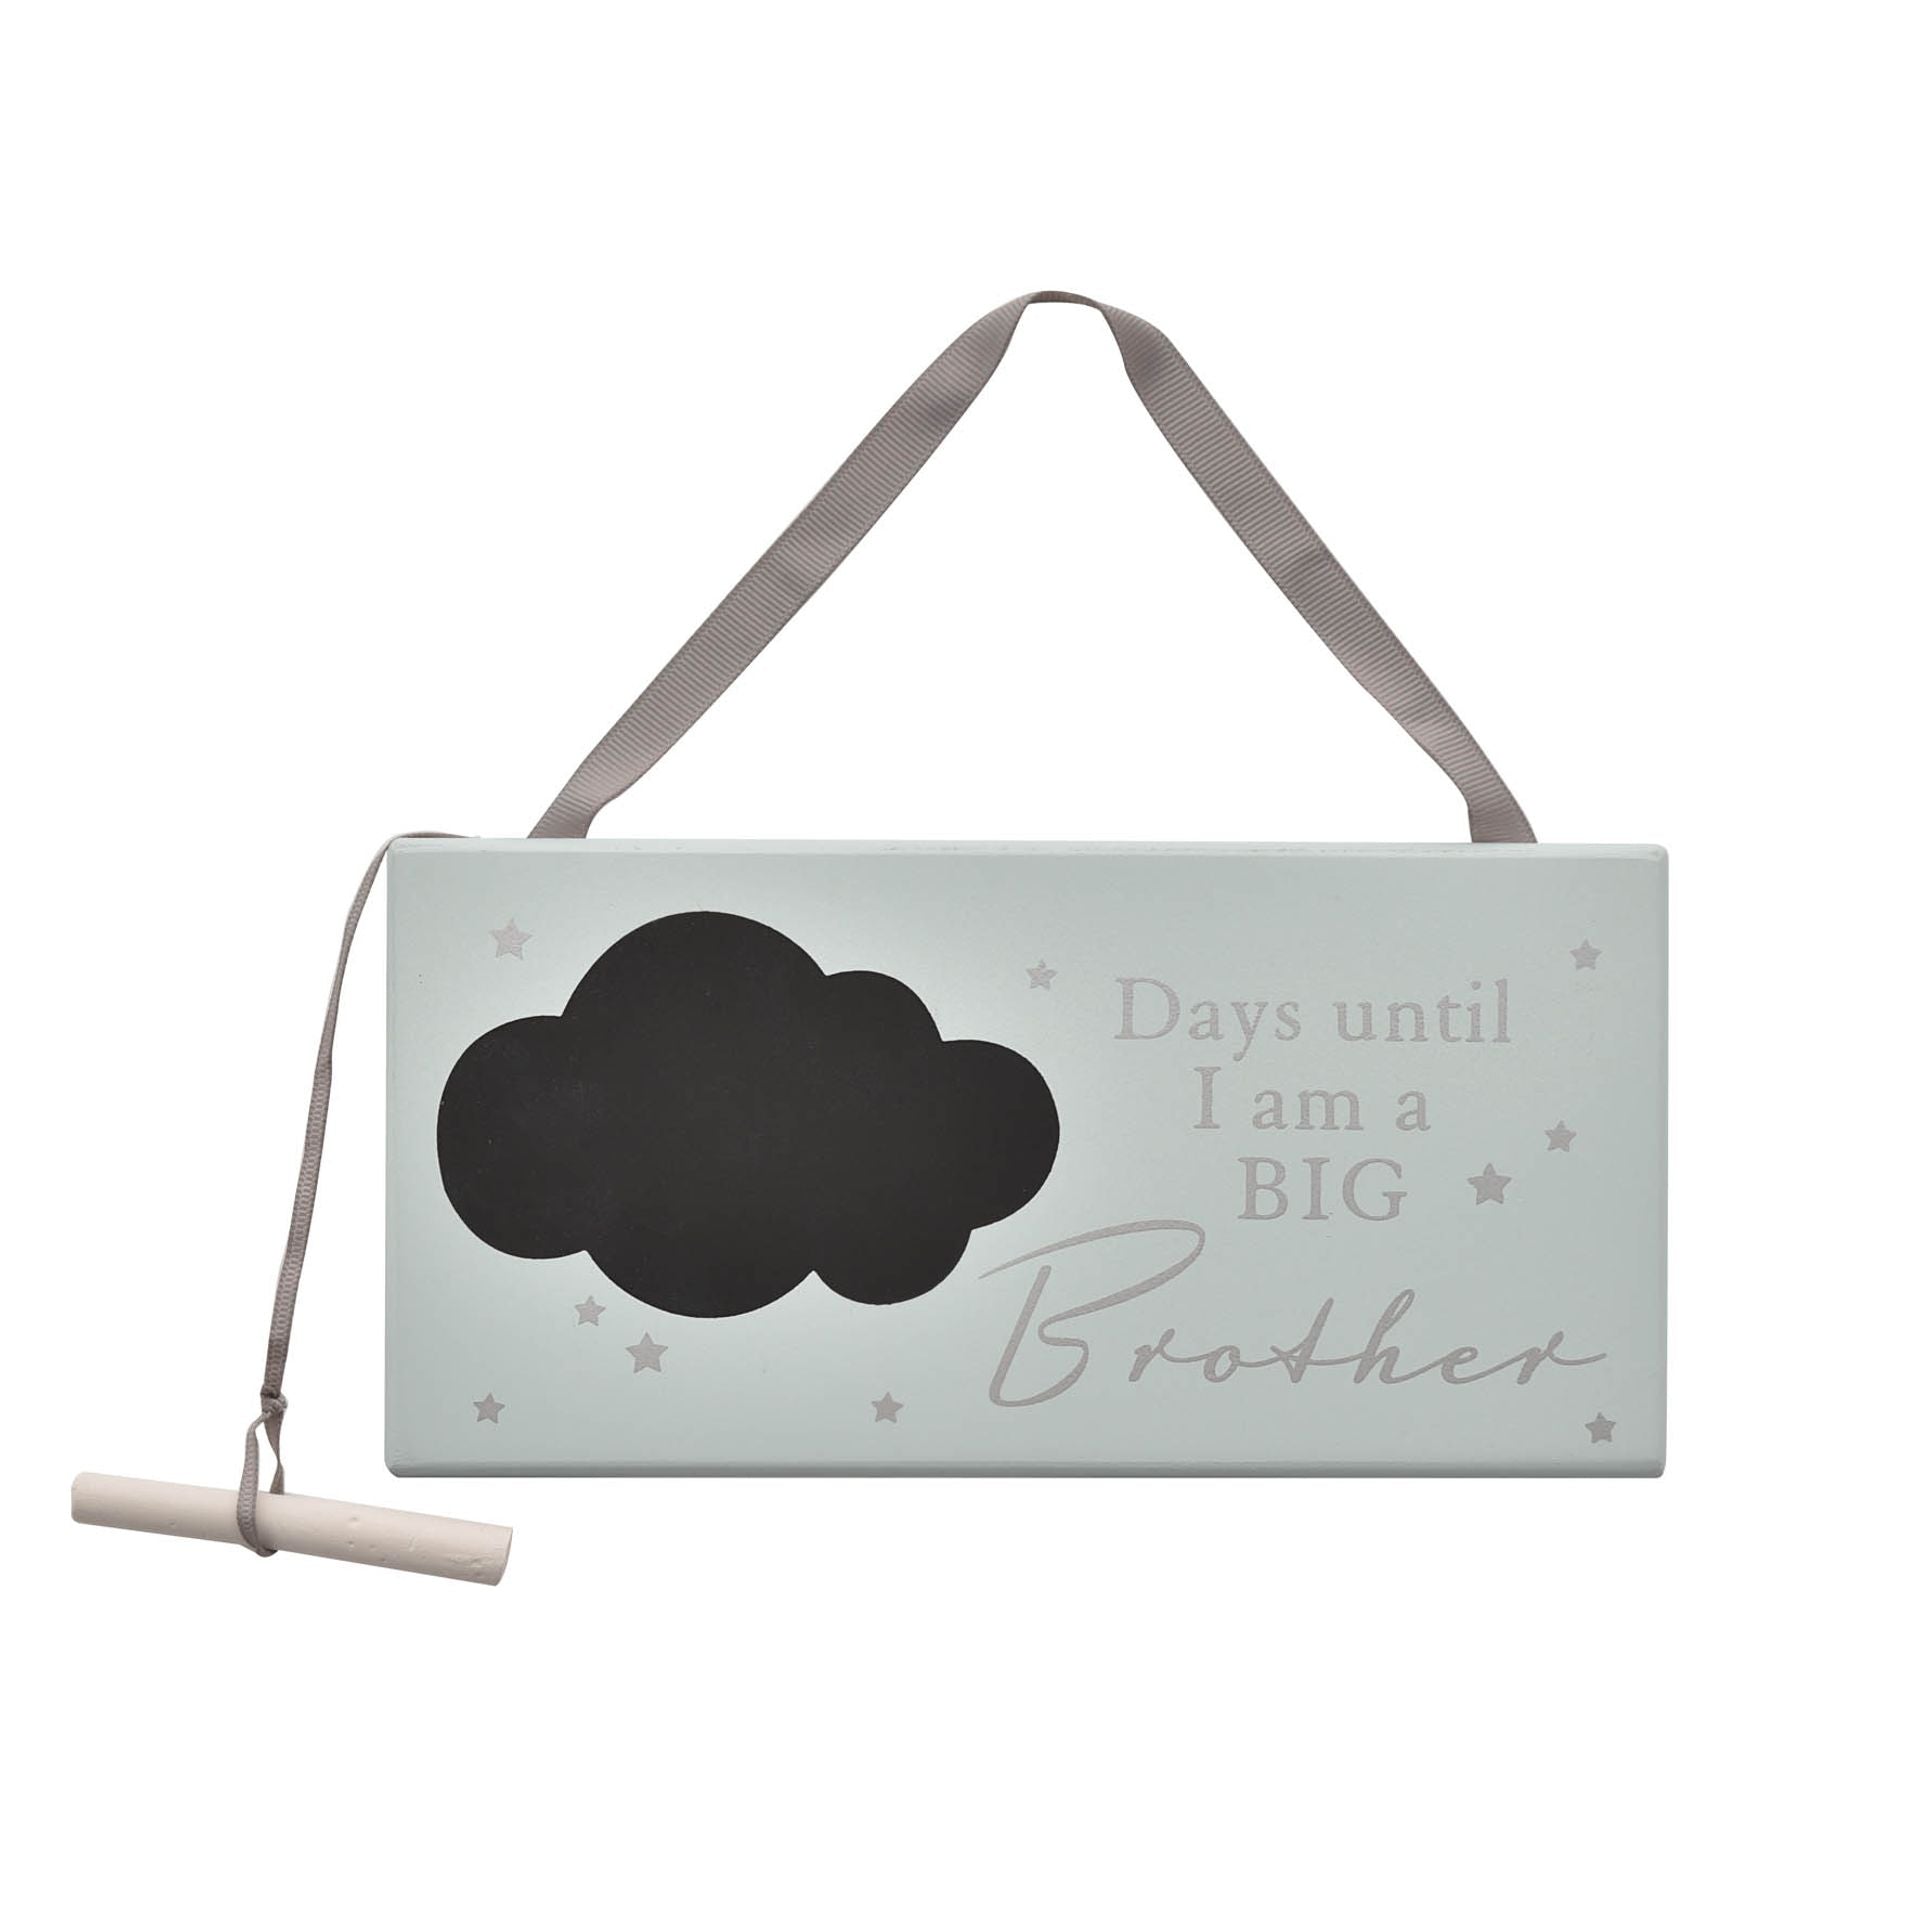 A chalk count down plaque with &#39;Days Until I Am A Big Brother&#39; written on it